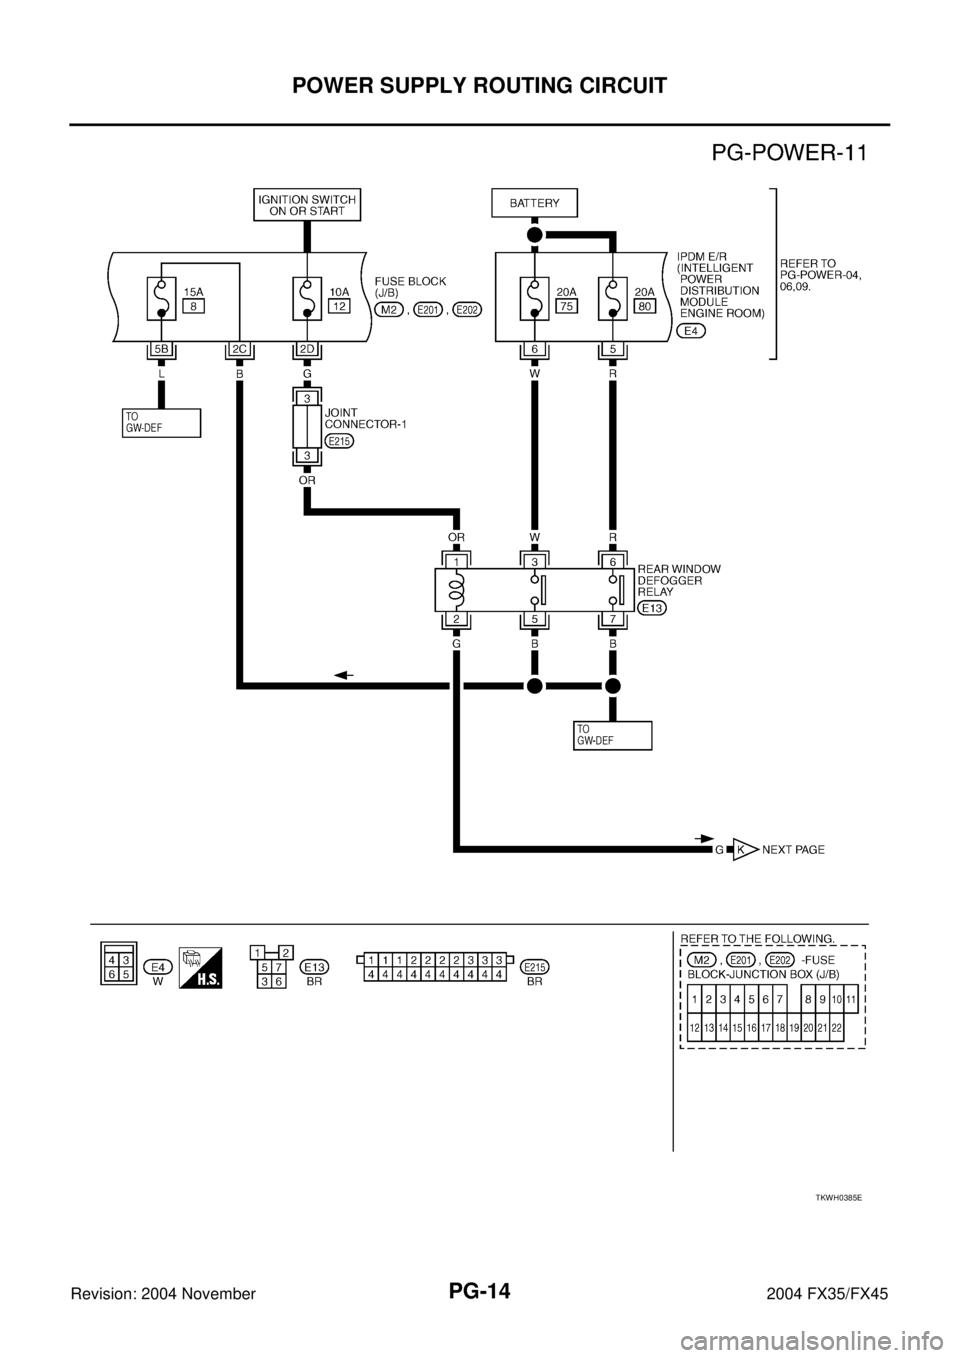 INFINITI FX35 2004  Service Manual PG-14
POWER SUPPLY ROUTING CIRCUIT
Revision: 2004 November 2004 FX35/FX45
TKWH0385E 